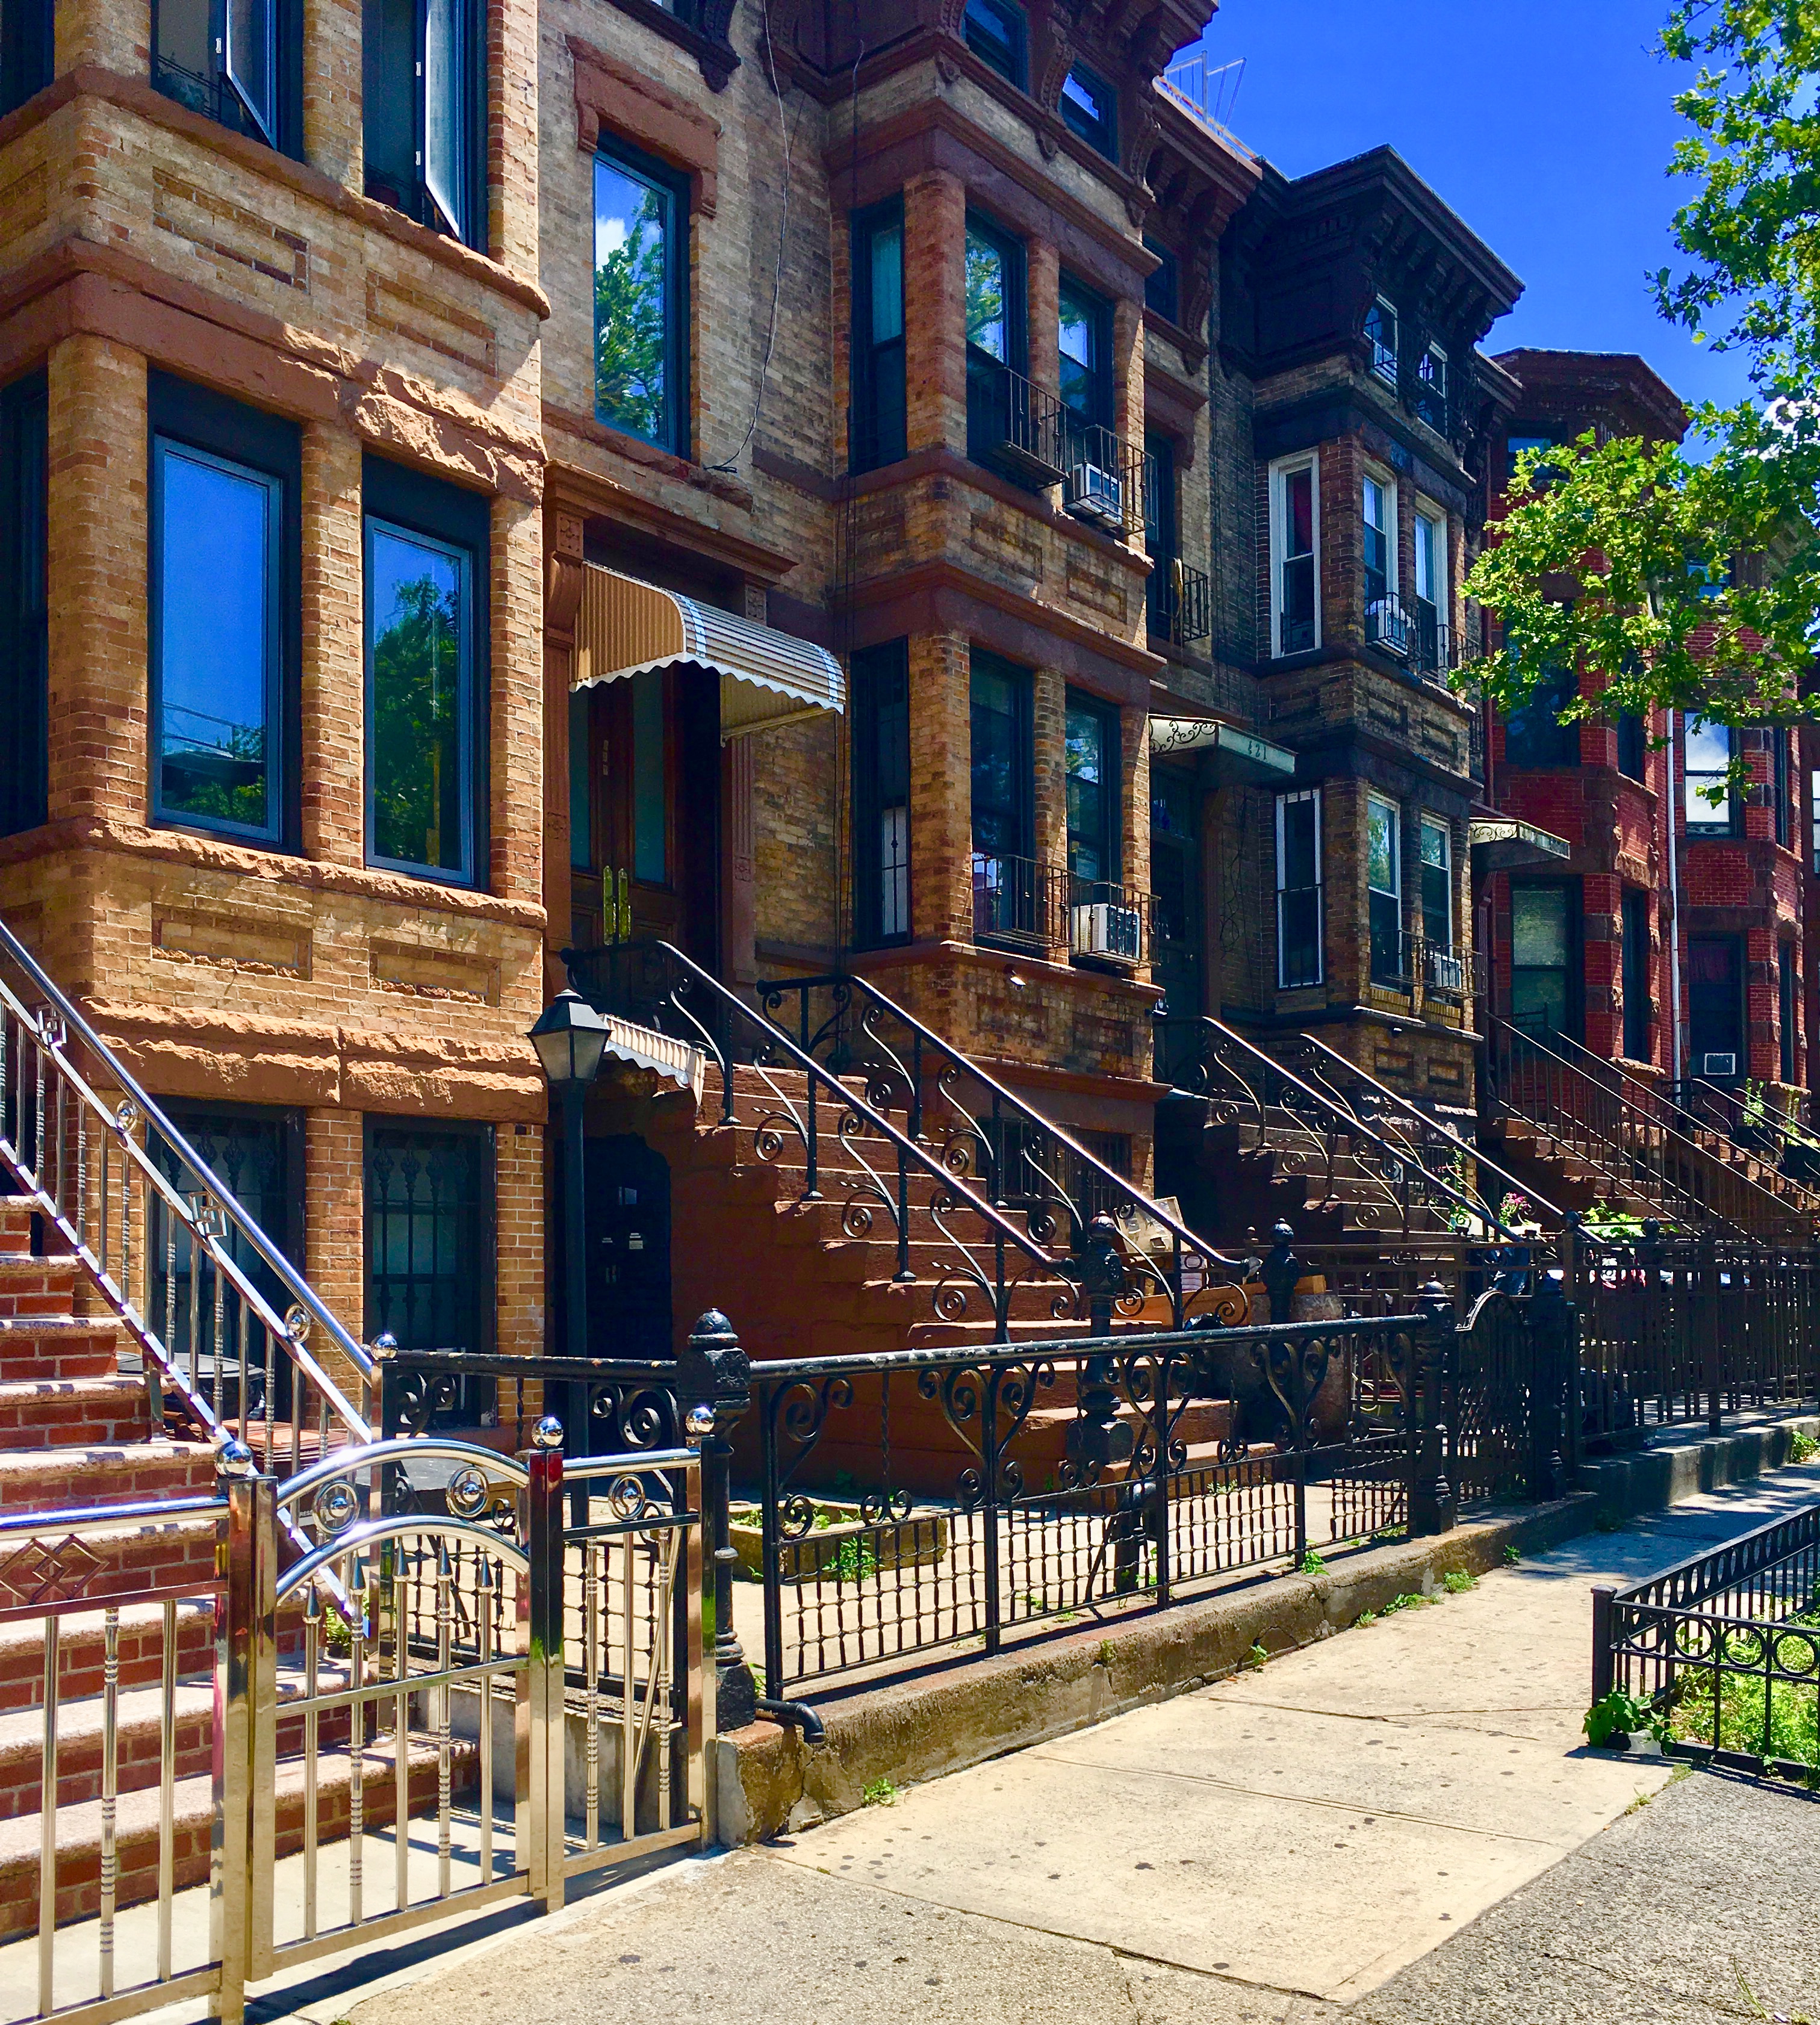 These Sunset Park South Historic District houses on 54th Street are real eye-catchers. Eagle photo by Lore Croghan